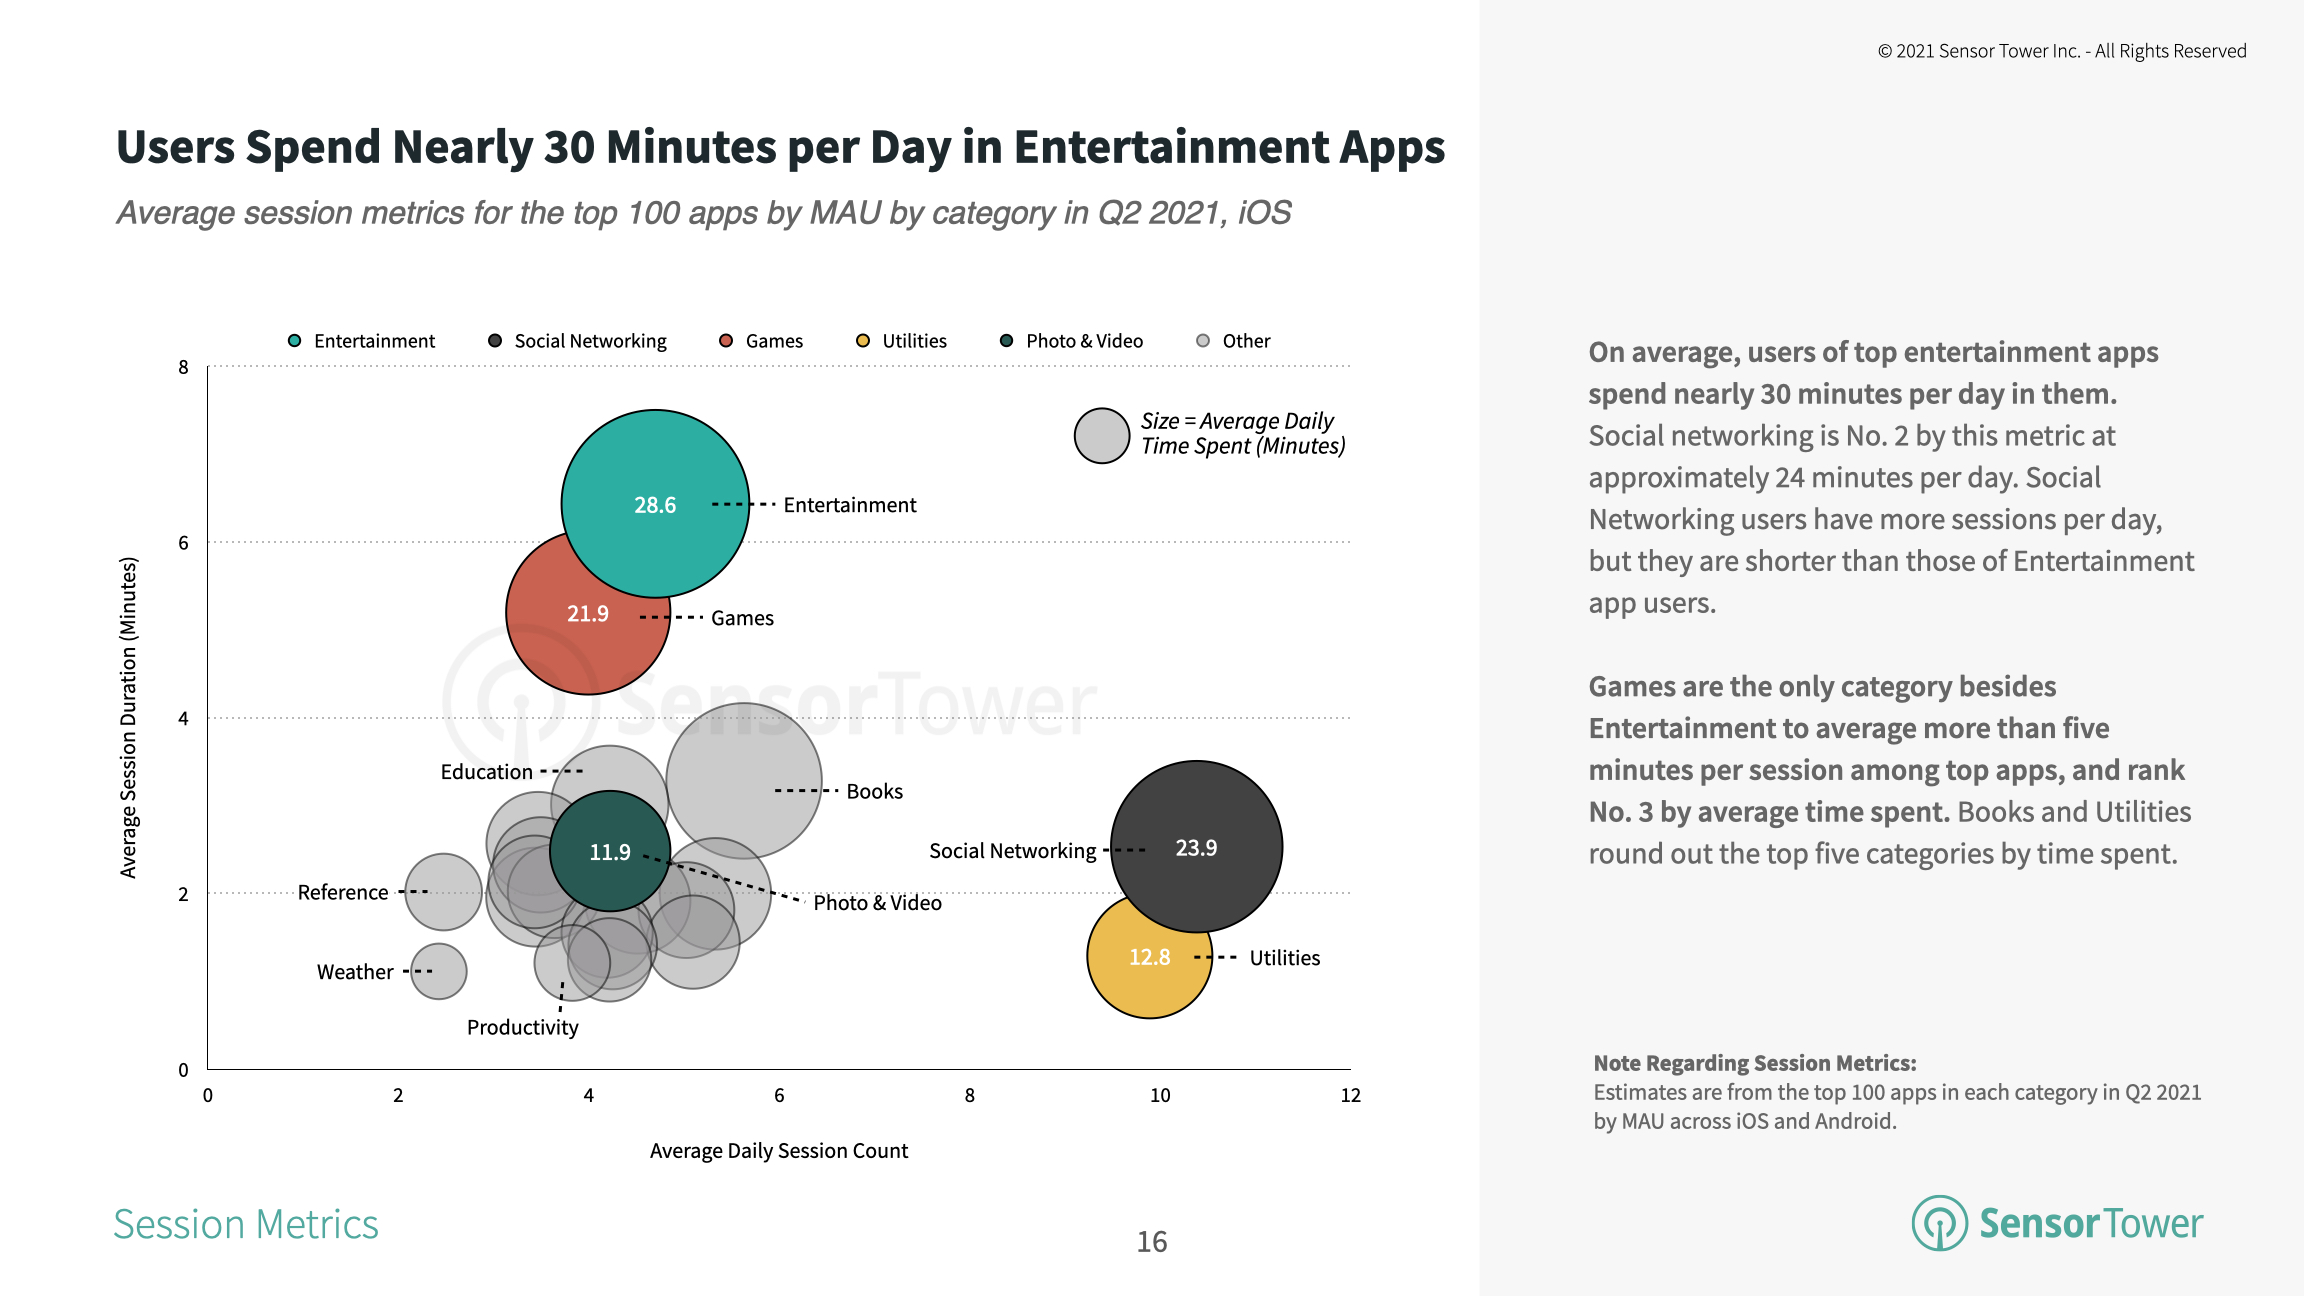 Users averaged about 28.6 minutes in Entertainment apps each day in 2Q21.